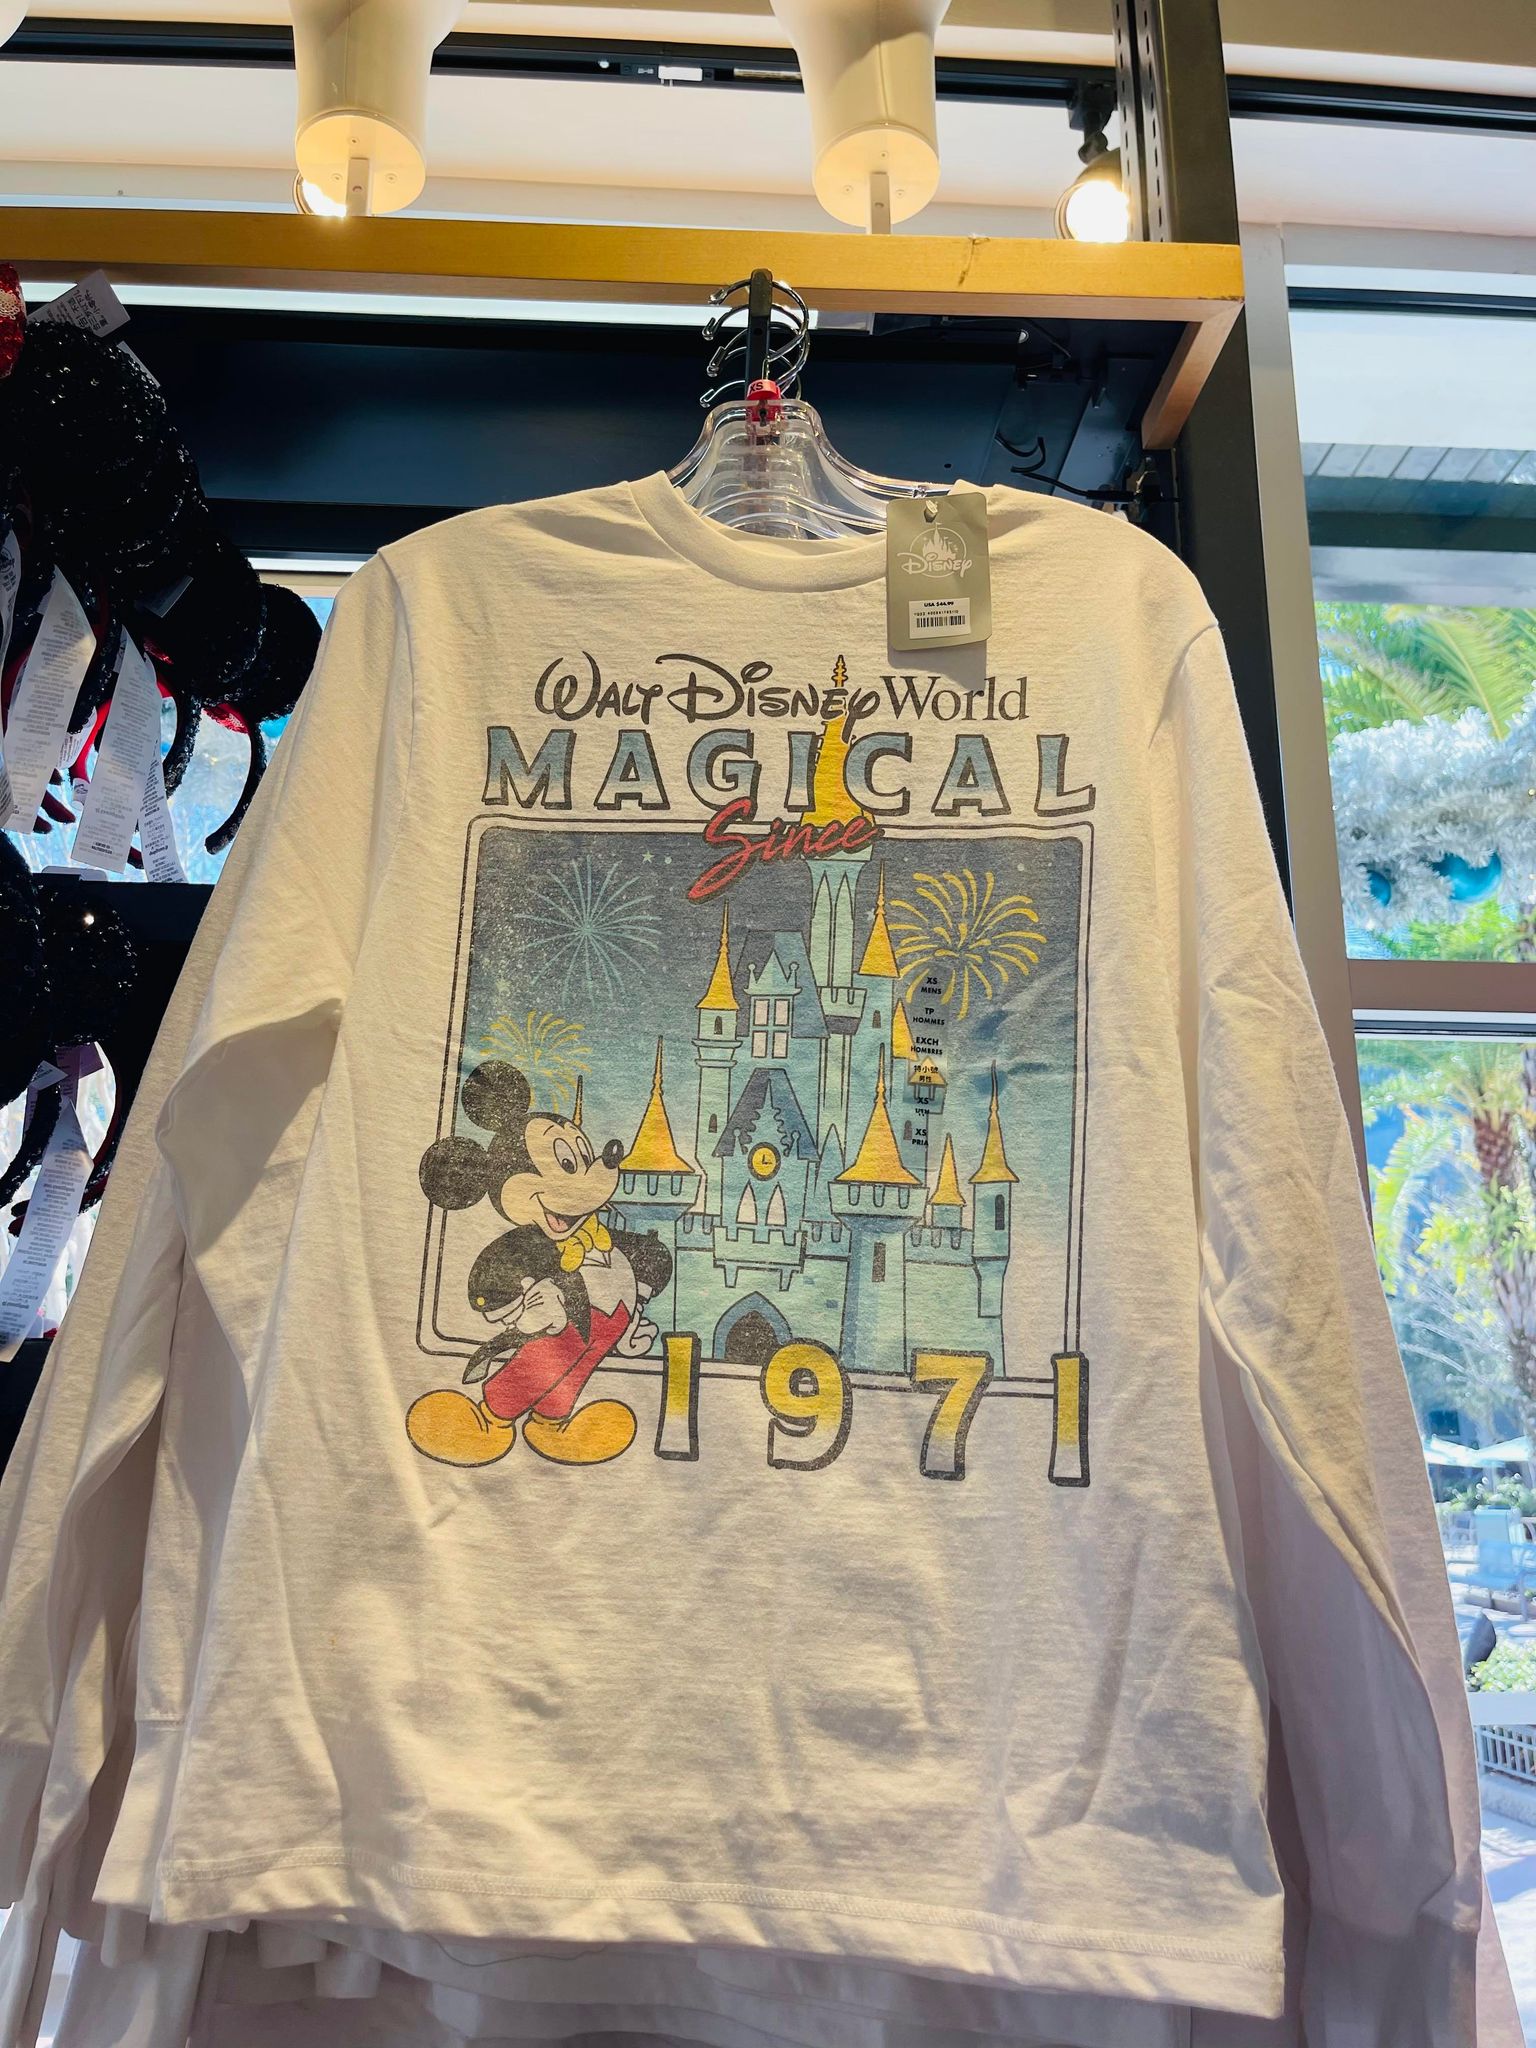 PHOTOS: Colorful New Walt Disney World Long-Sleeved Shirt Now Available -  WDW News Today